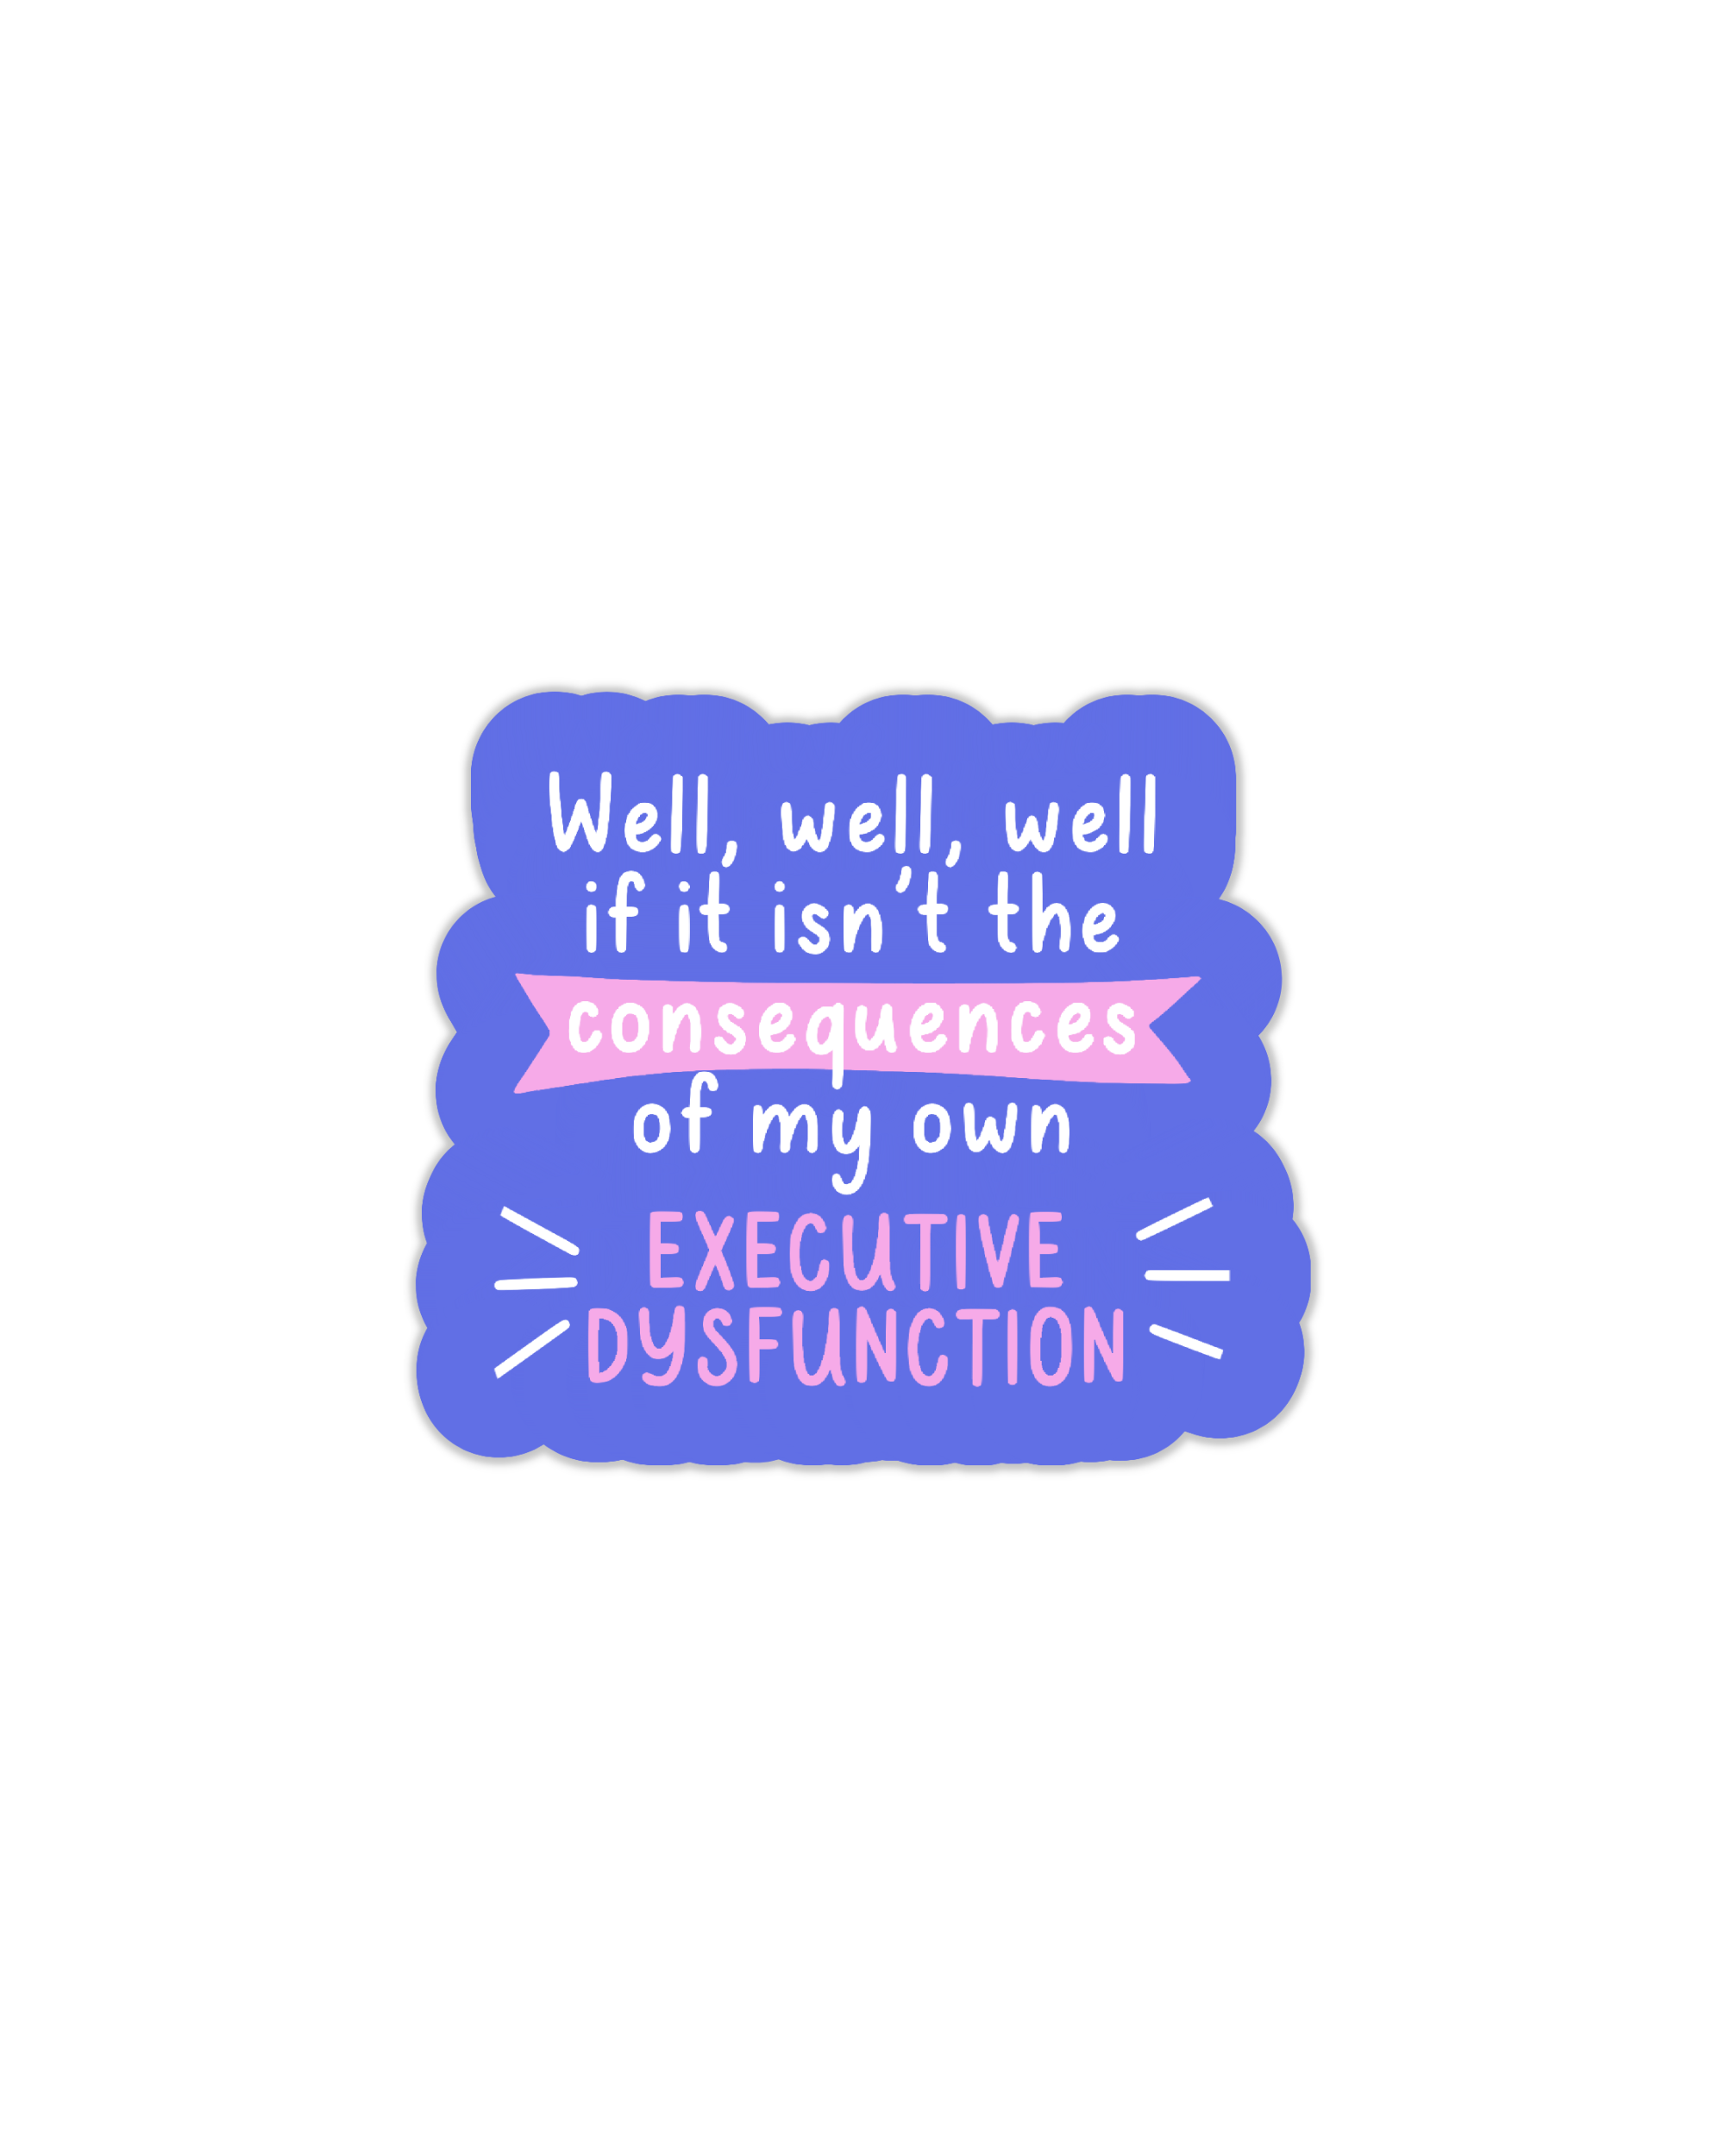 The Well, well, well, if it isn't the consequences of my own executive dysfunction sticker.